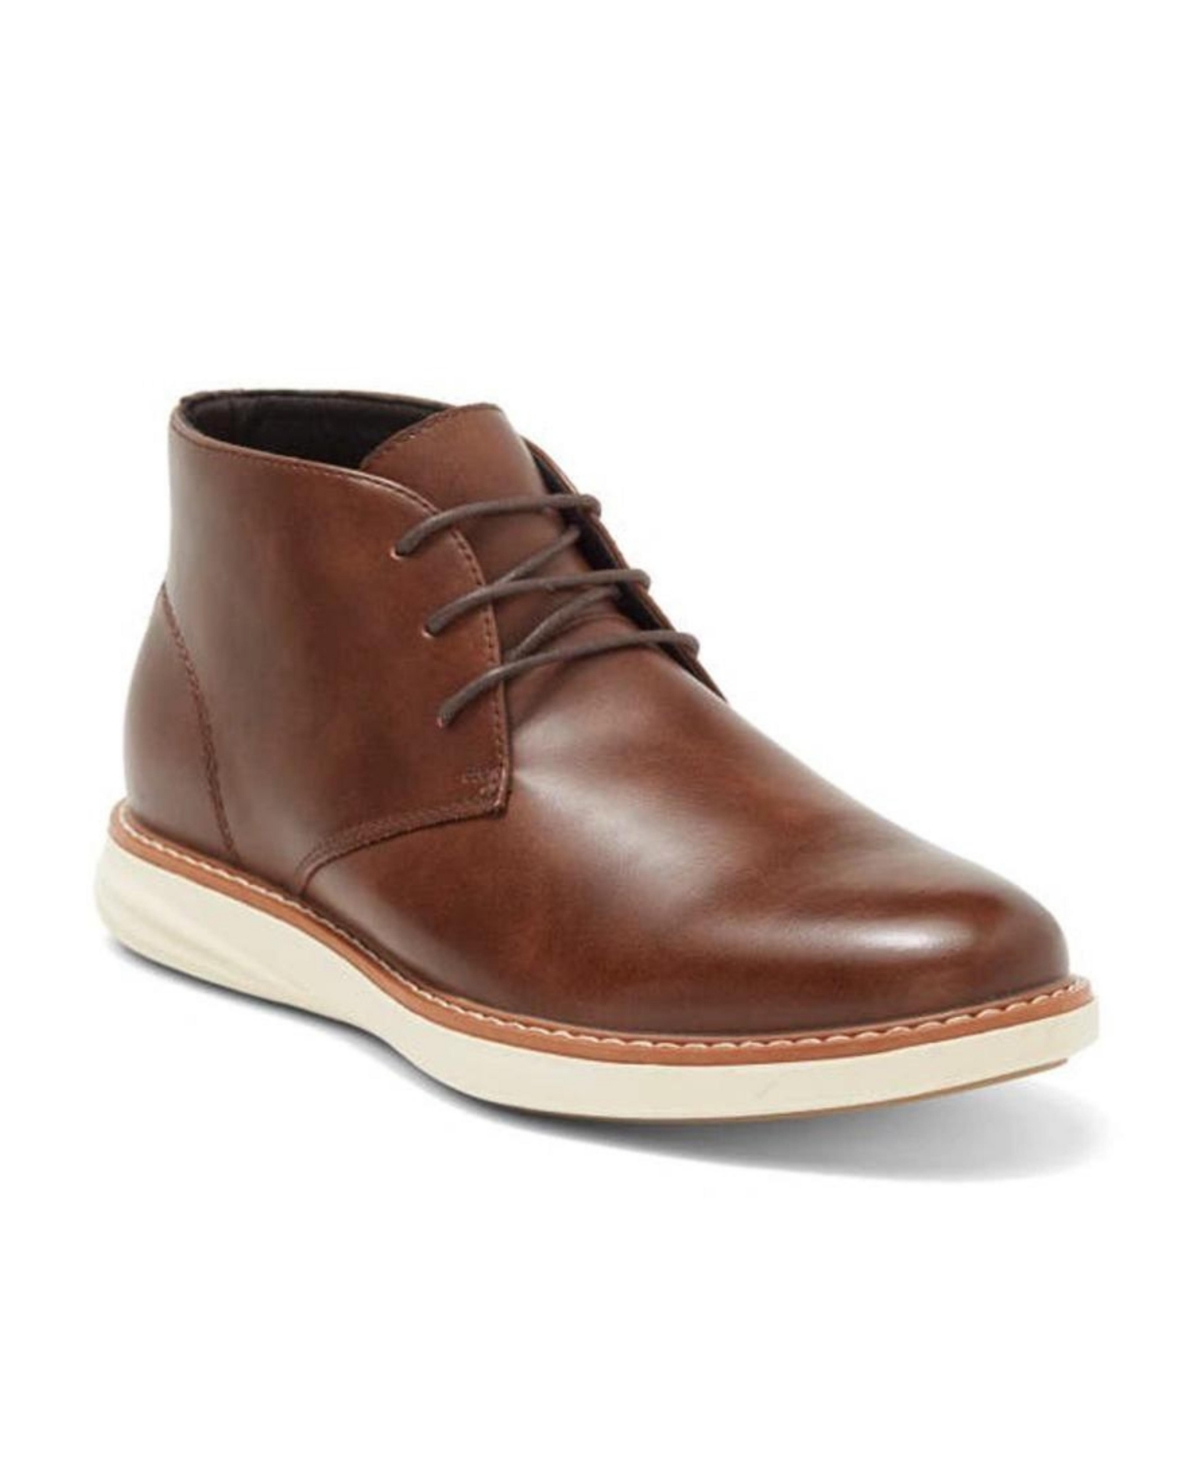 Men's Dress Casual Hybrid Lace-Up Chukka Boot - Brown